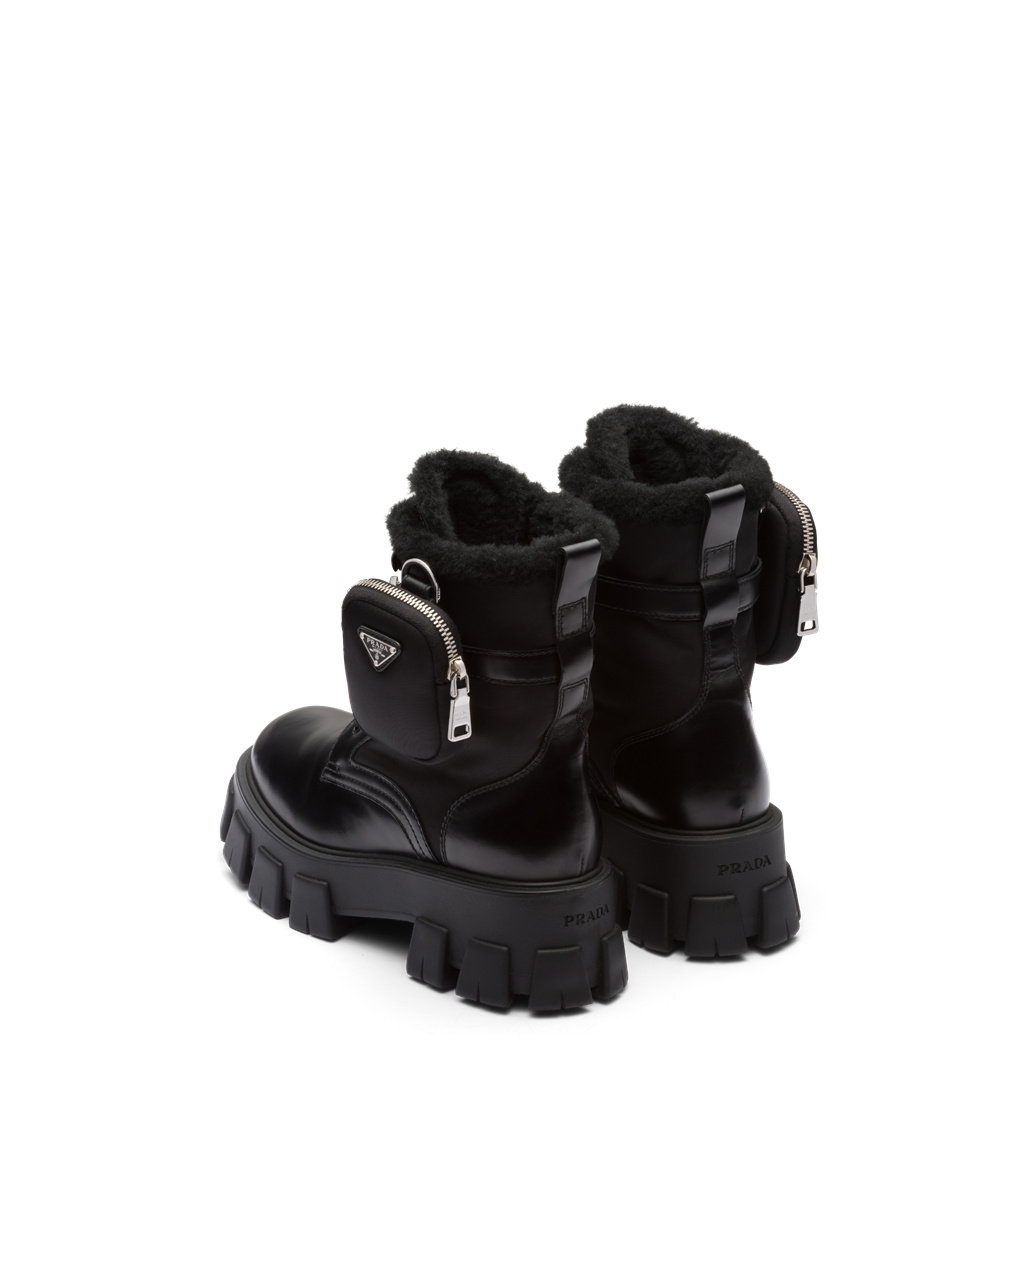 Prada Ankle Boots Clearance - Monolith Leather And Nylon Biker Boots Womens  Black